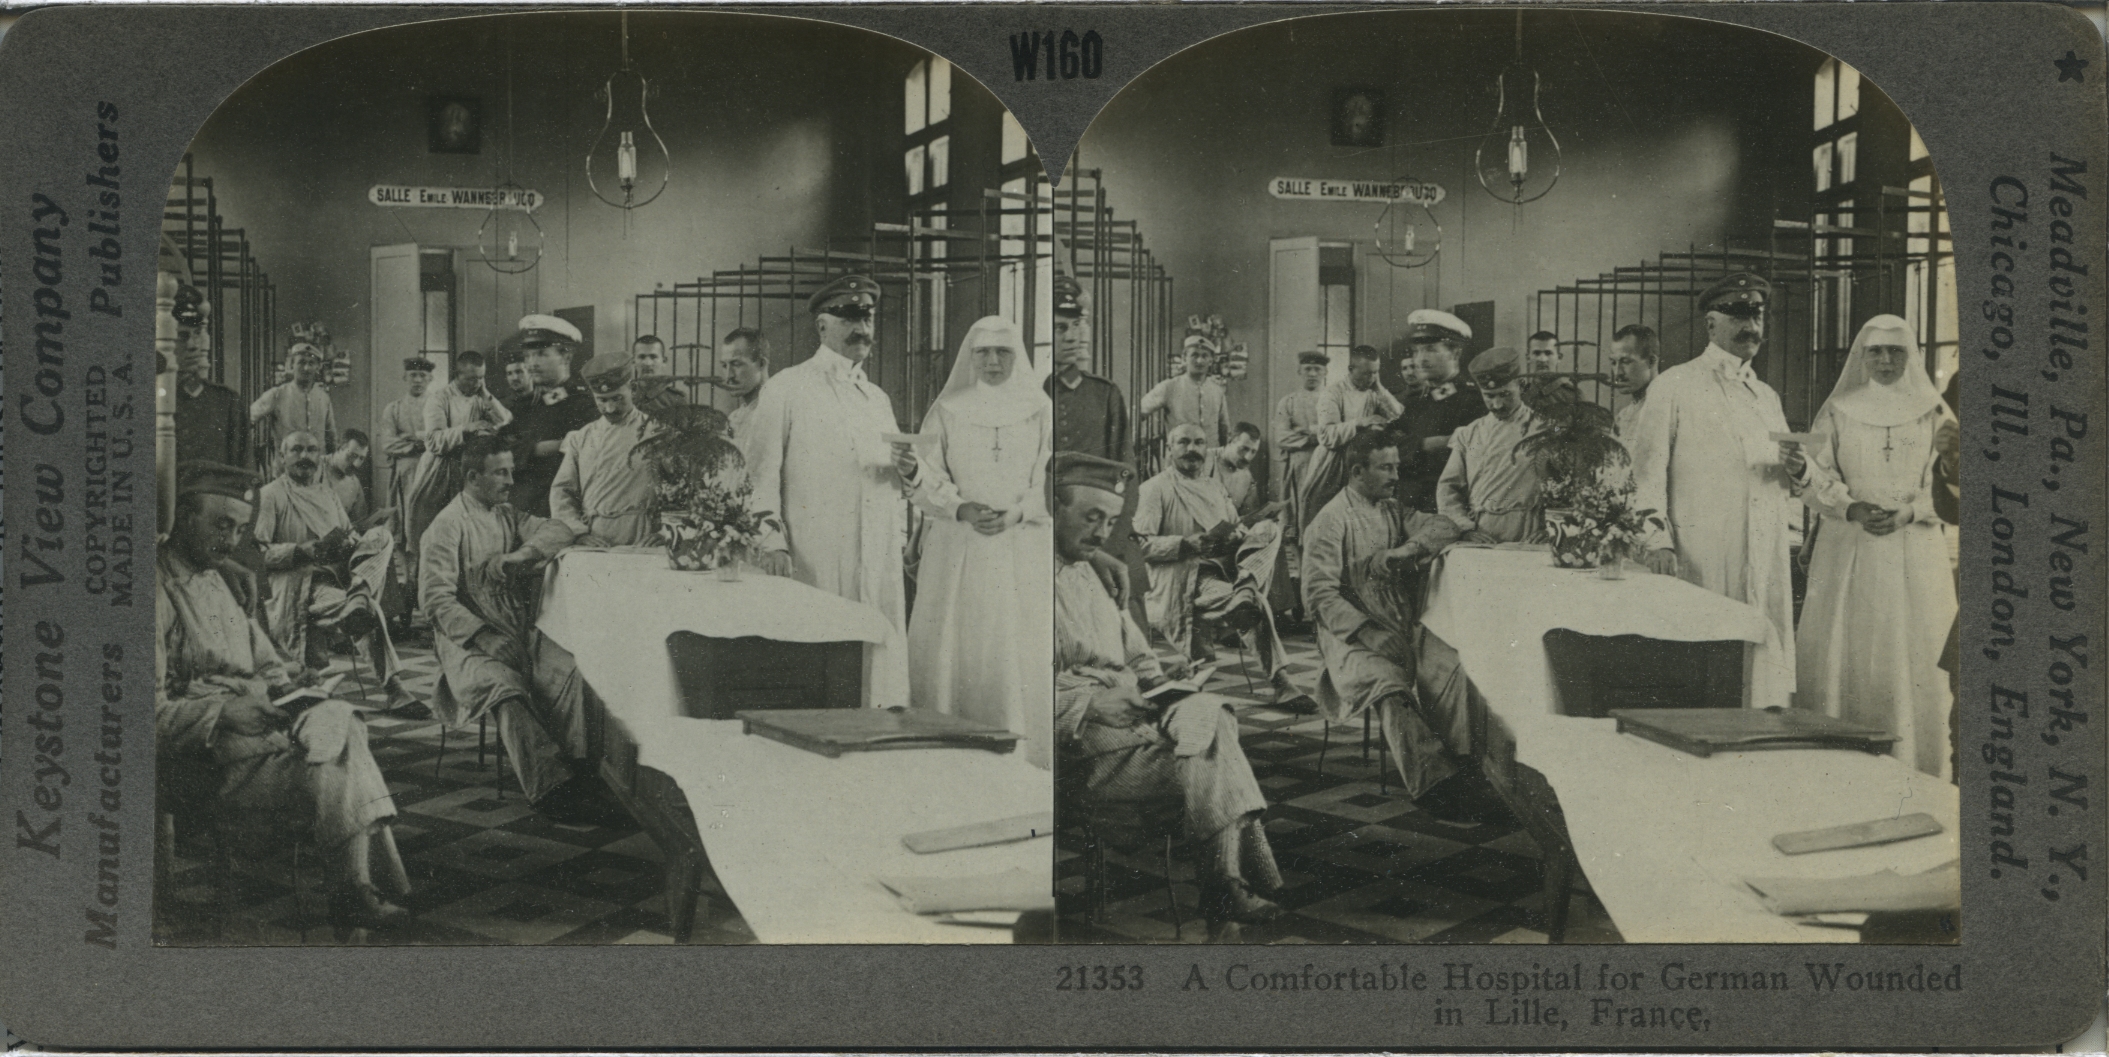 A Comfortable Hospital for German Wounded in Lille, France